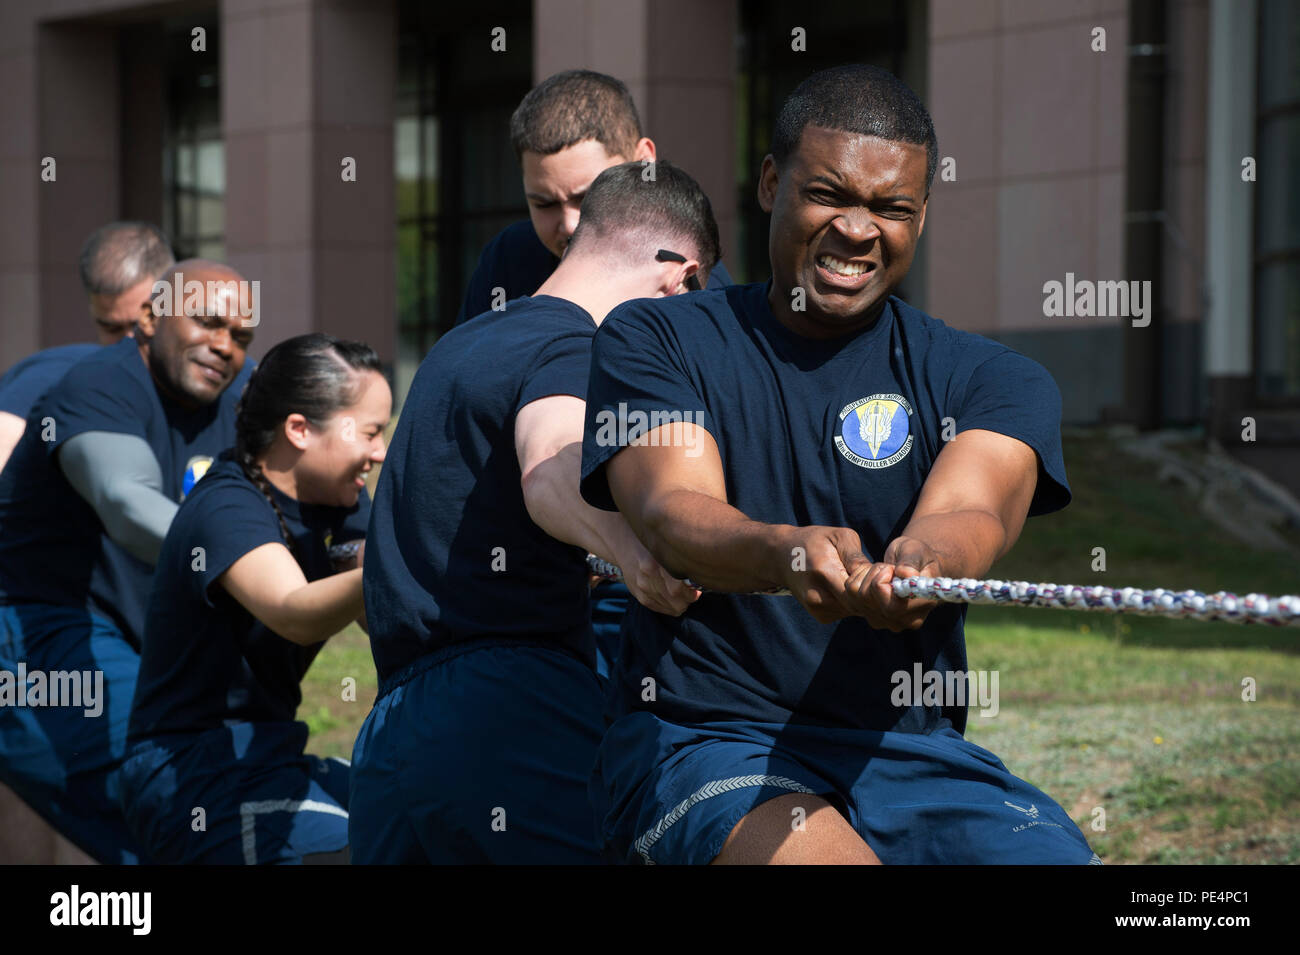 Airmen from the 86th Comptroller Squadron work together during a game of tug-of-war for the Commander’s Challenge Sept. 9, 2015, at Ramstein Air Base, Germany. The 86th Airlift Wing staff agencies and 86th CPTS placed second overall in the Commander’s Challenge. (U.S. Air Force photo/Airman 1st Class Larissa Greatwood) Stock Photo